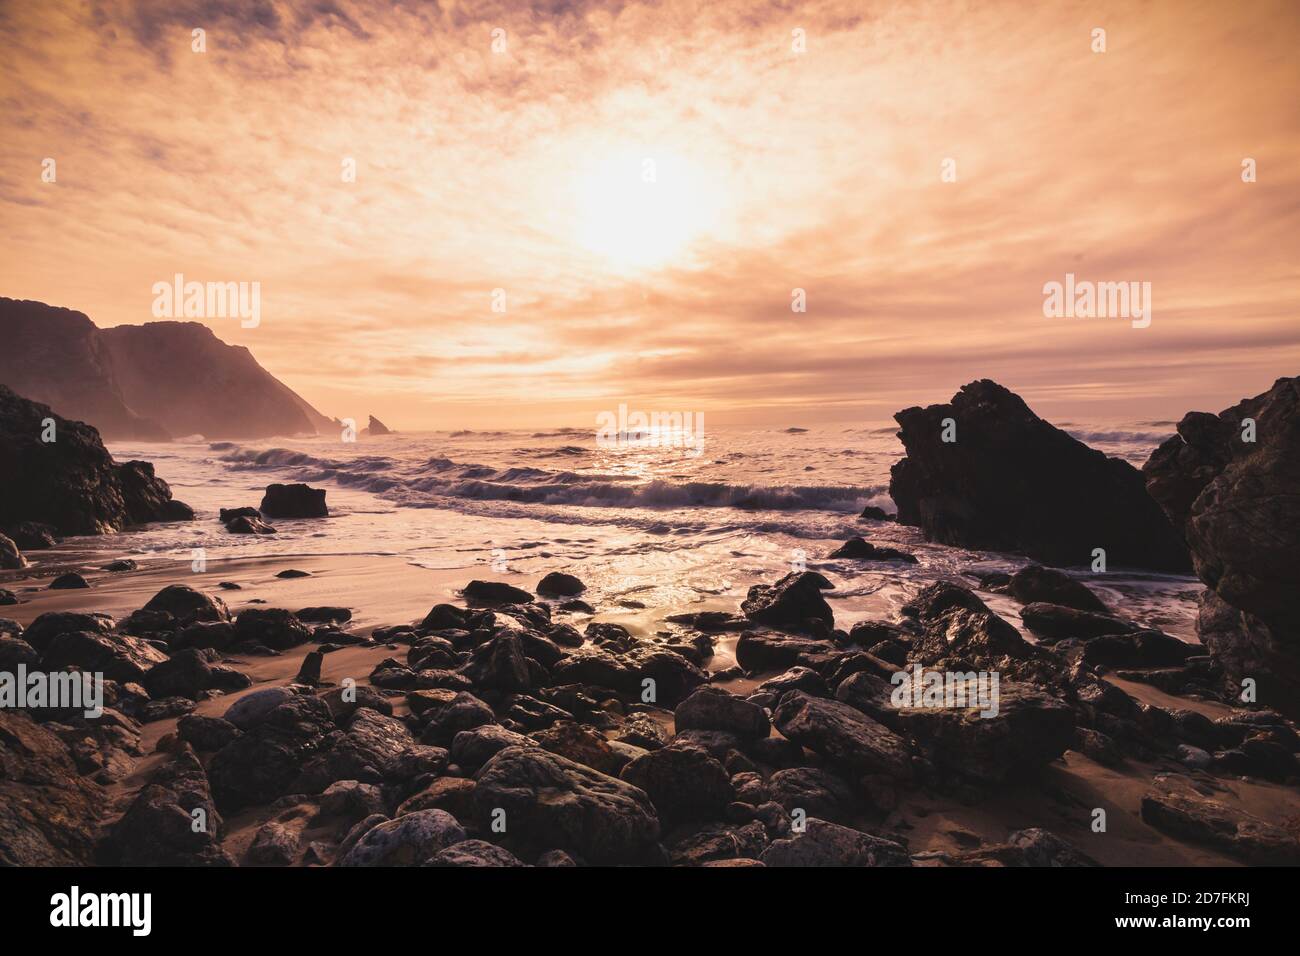 The beautiful sunset on the beach, Sintra, Portugal Stock Photo